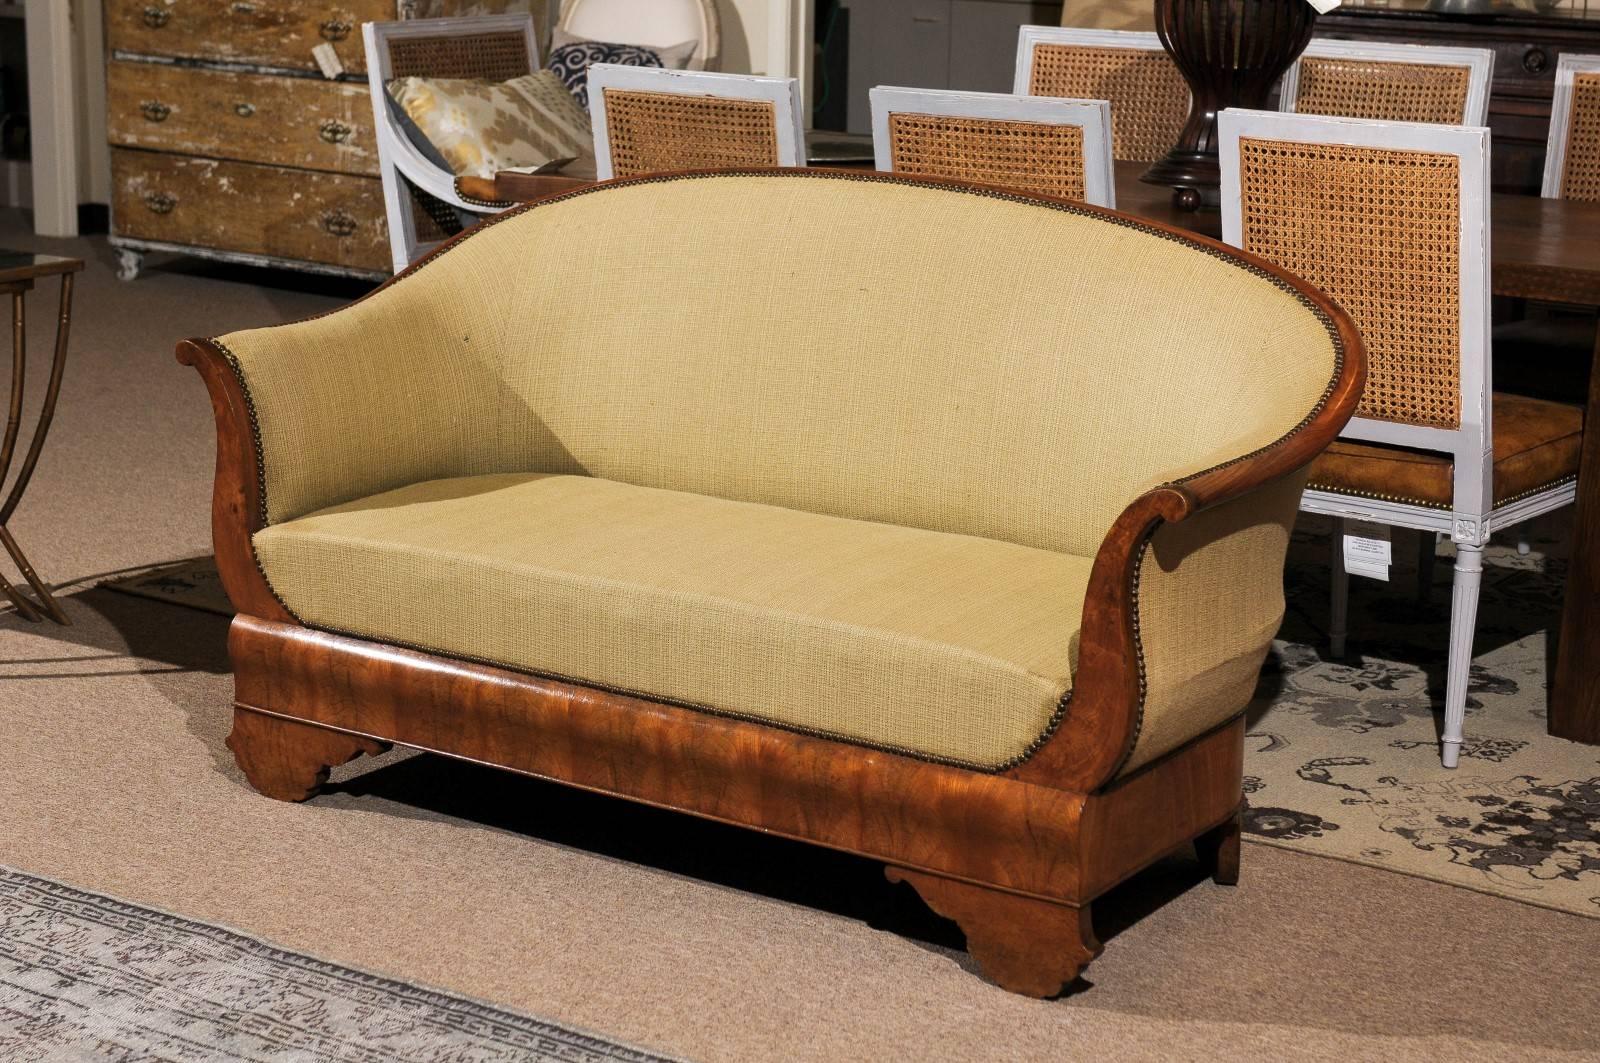 Period Louis Philippe Settee in Burled Walnut, circa 1840 For Sale 1